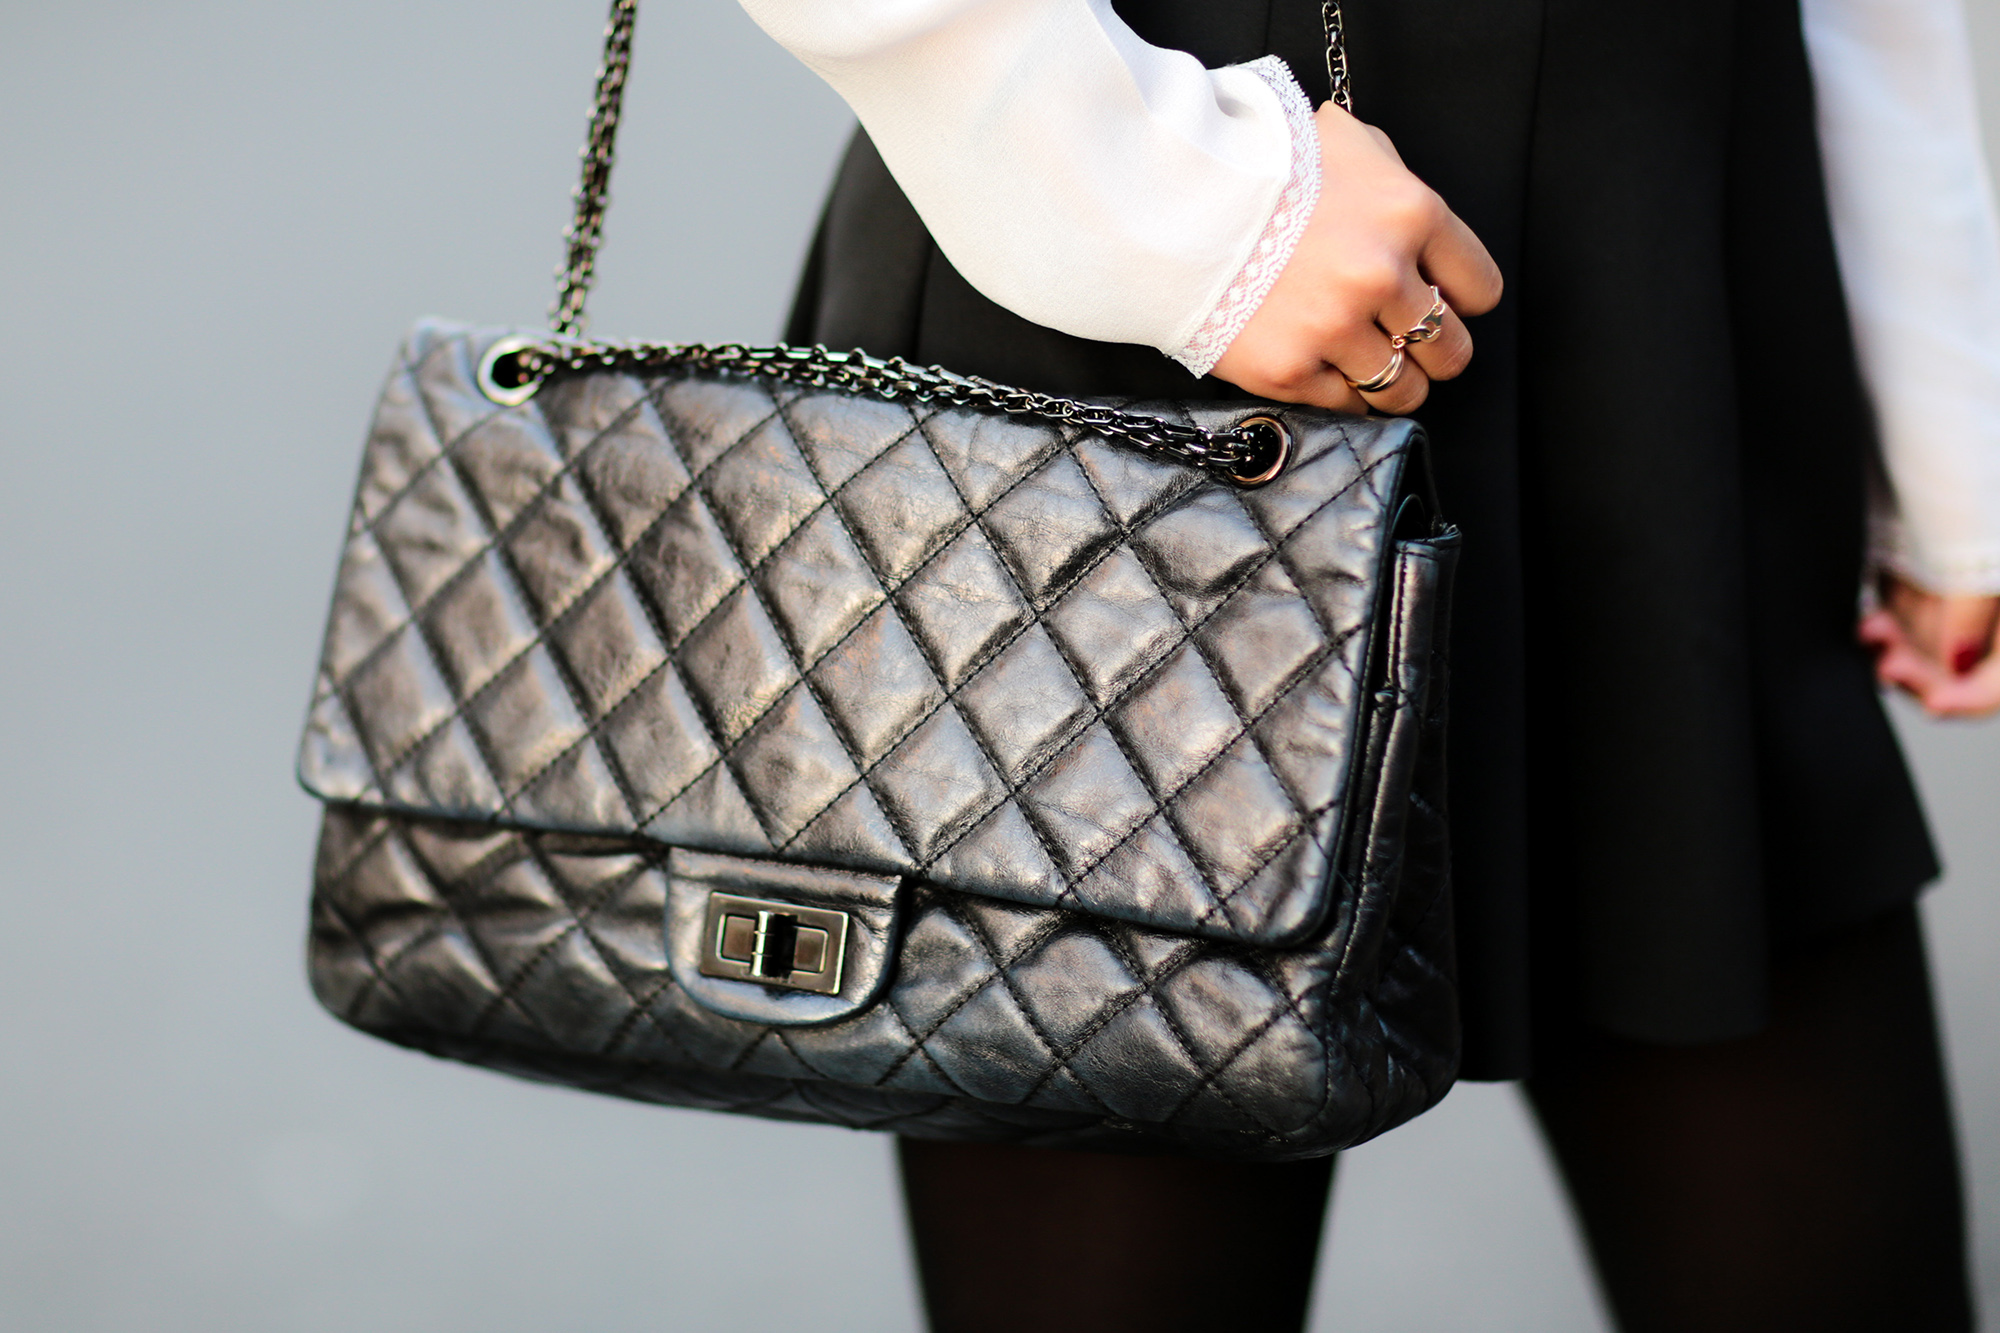 Chanel Bag Value Increased 70 Percent in Last 6 Years  Fashionista